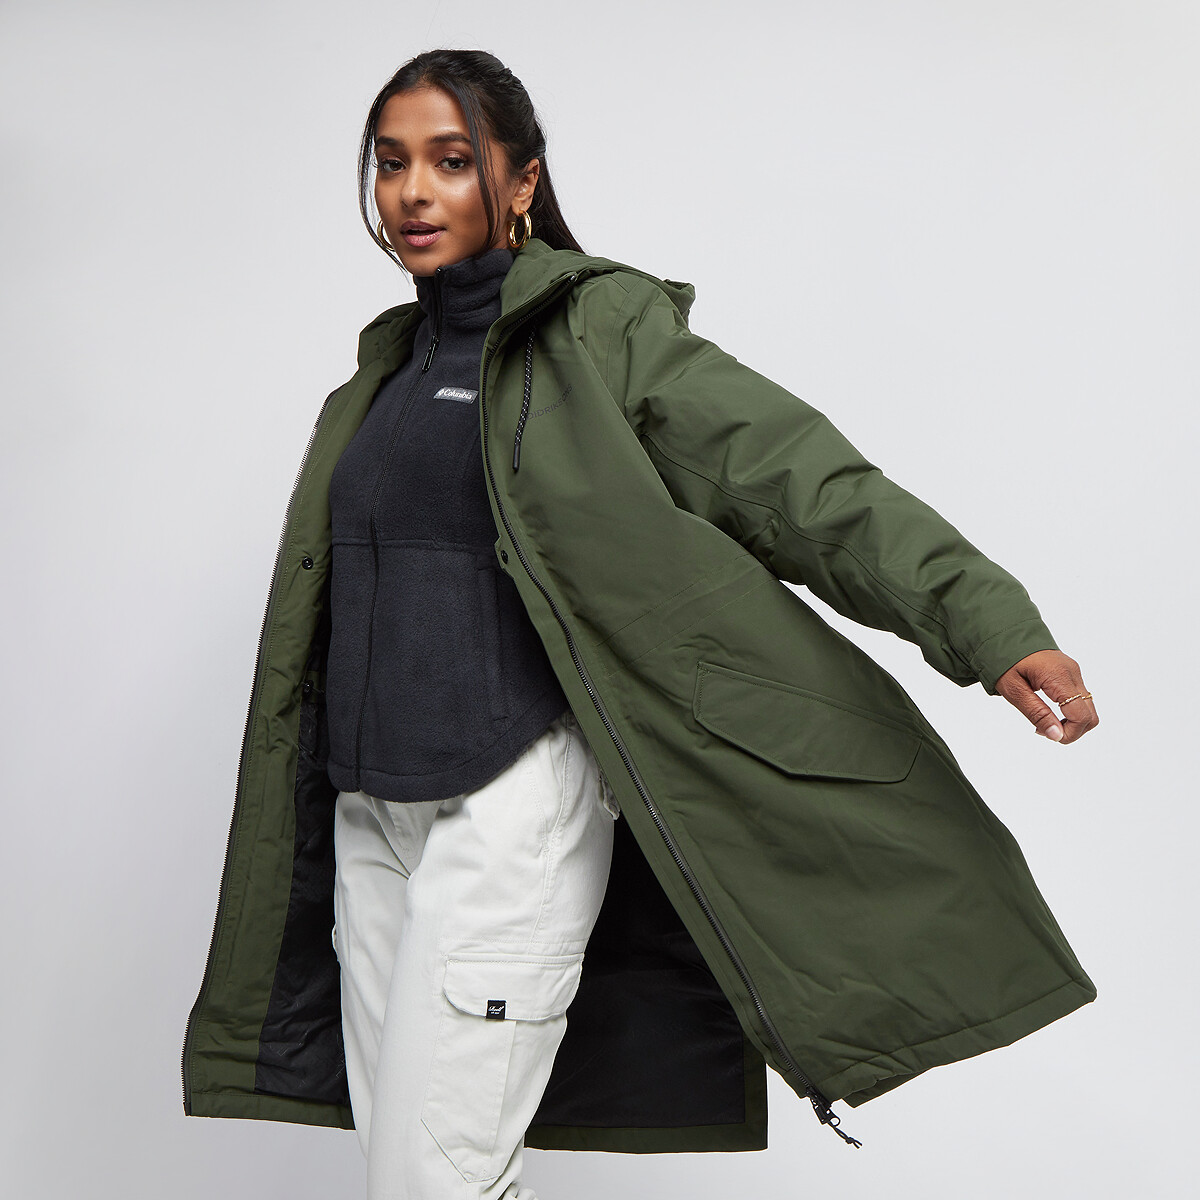 £100.00 from Best Deals (Today) deep green Didriksons – Buy Parka Marta-Lisa on